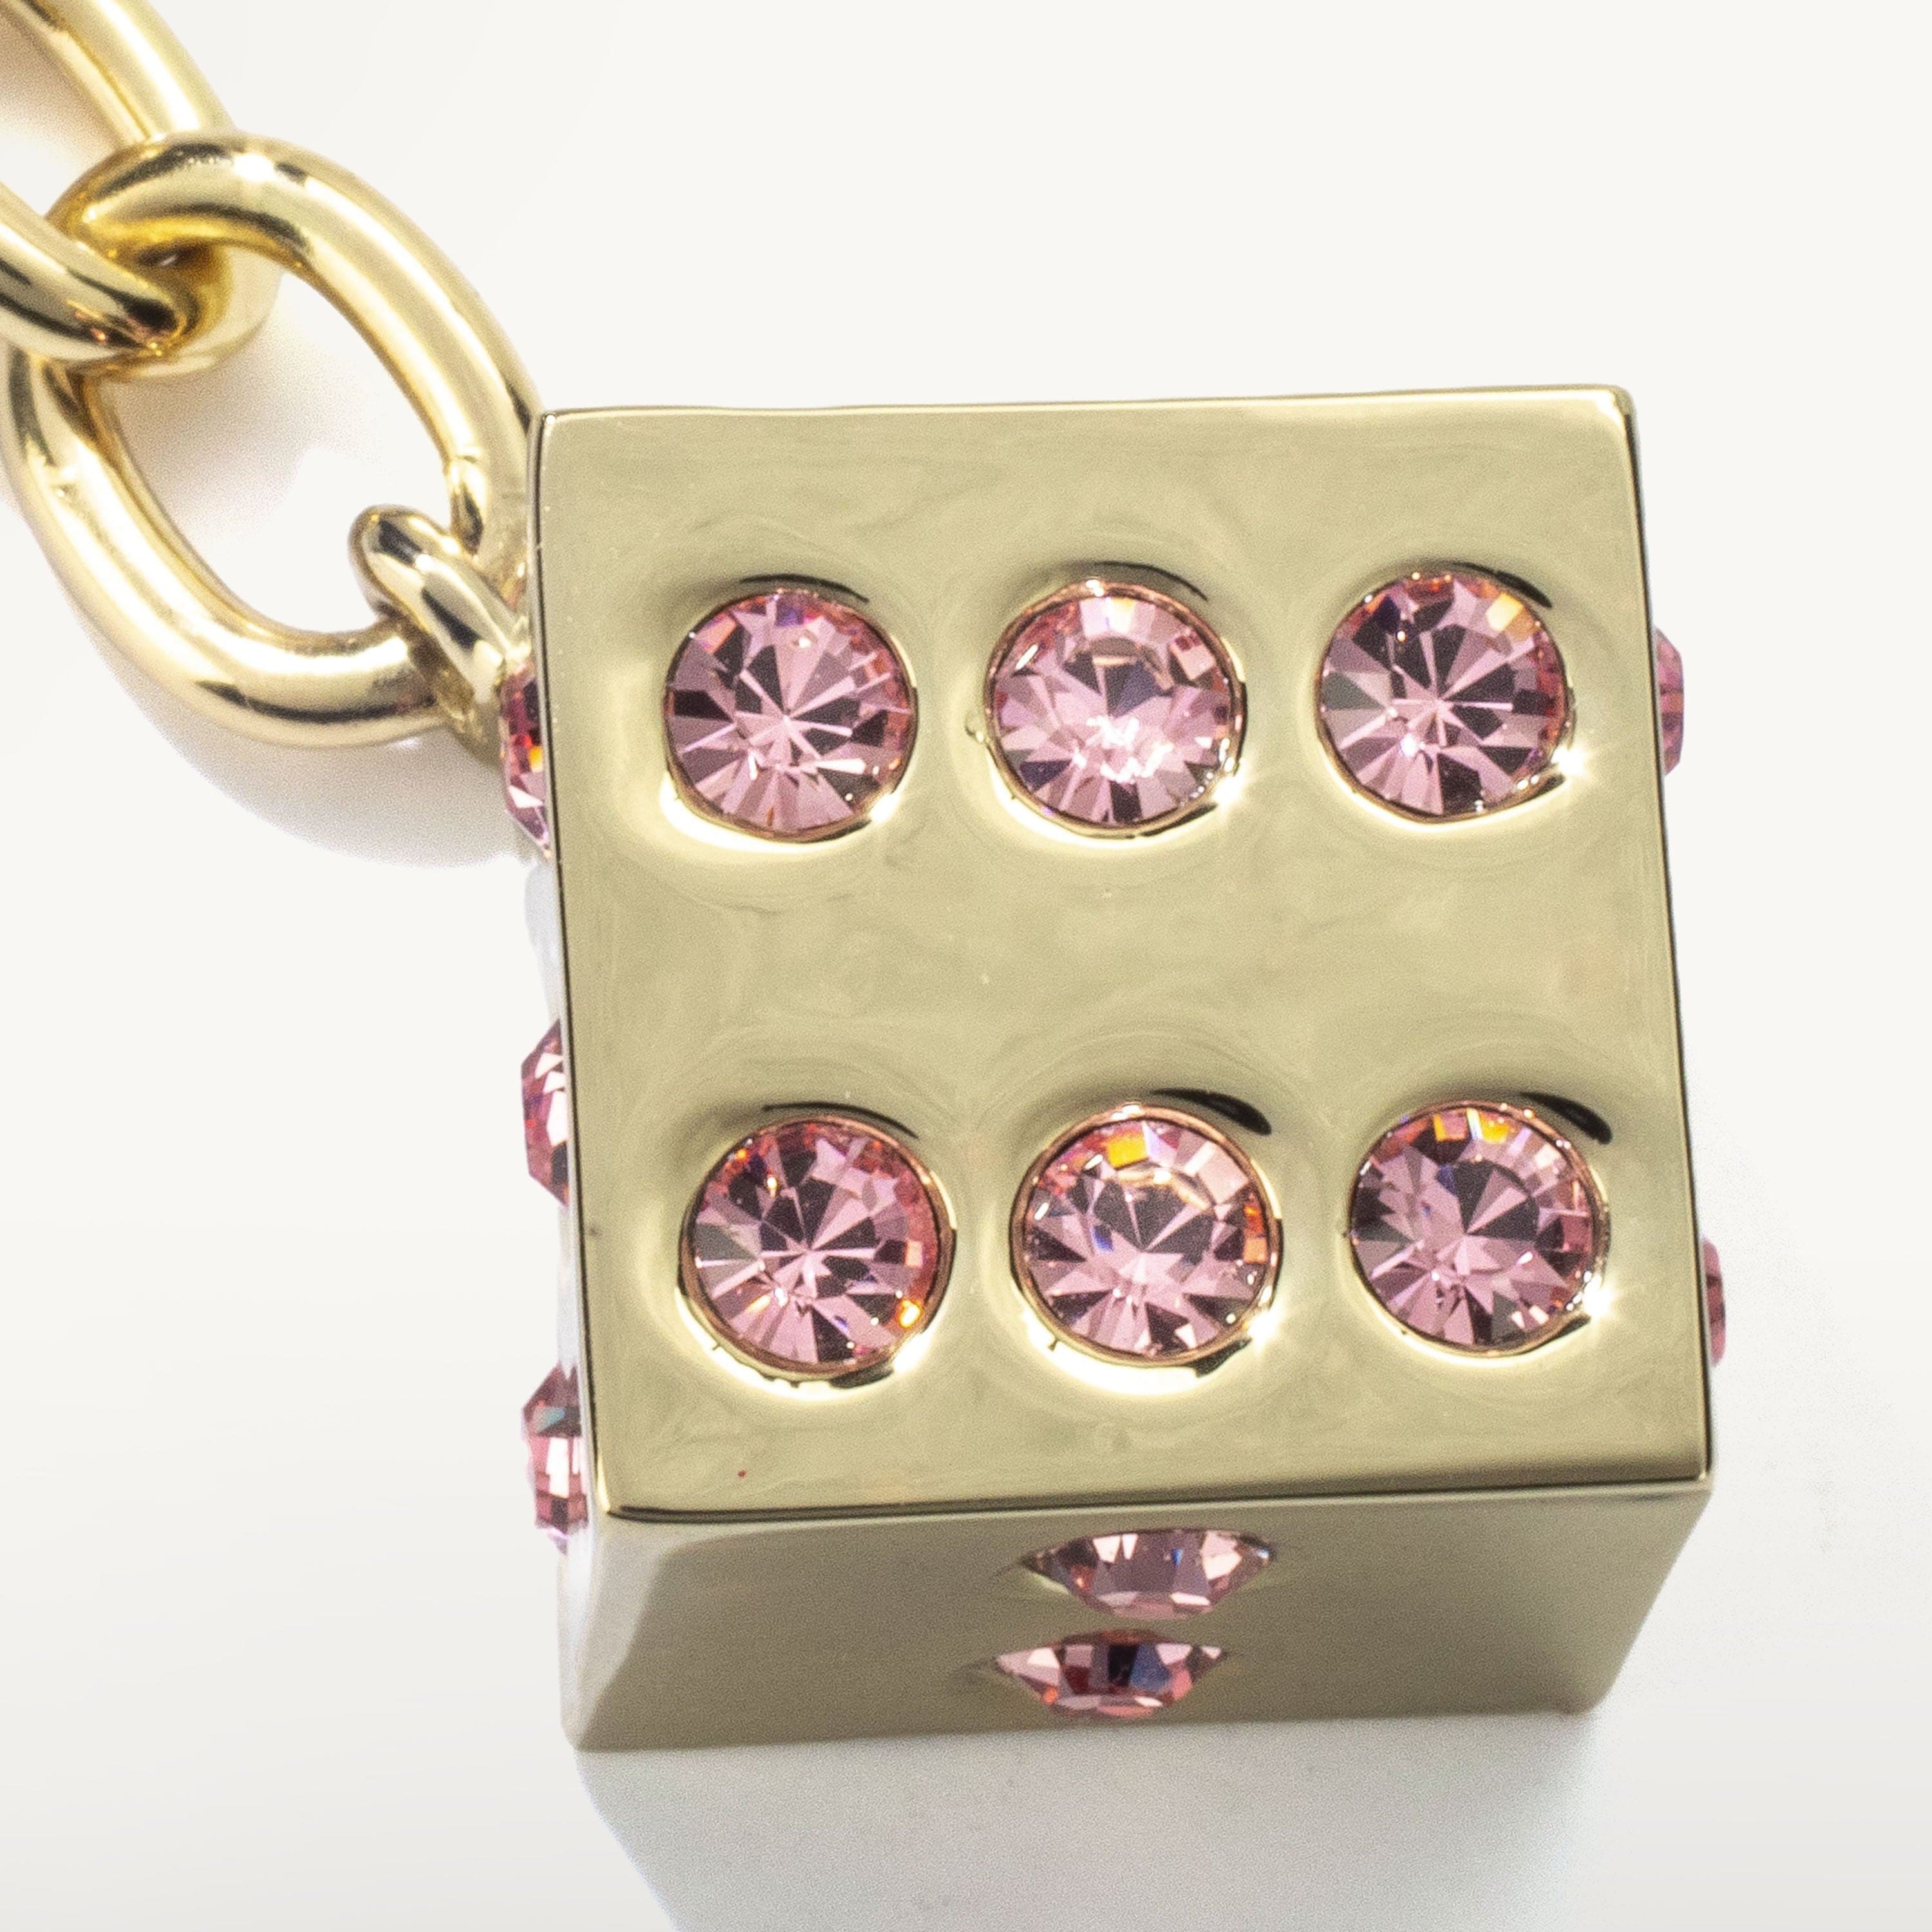 Kalifano Crystal Keychains Pink LV Dice with Gold keychain made with Swarovski Crystals SKC-135